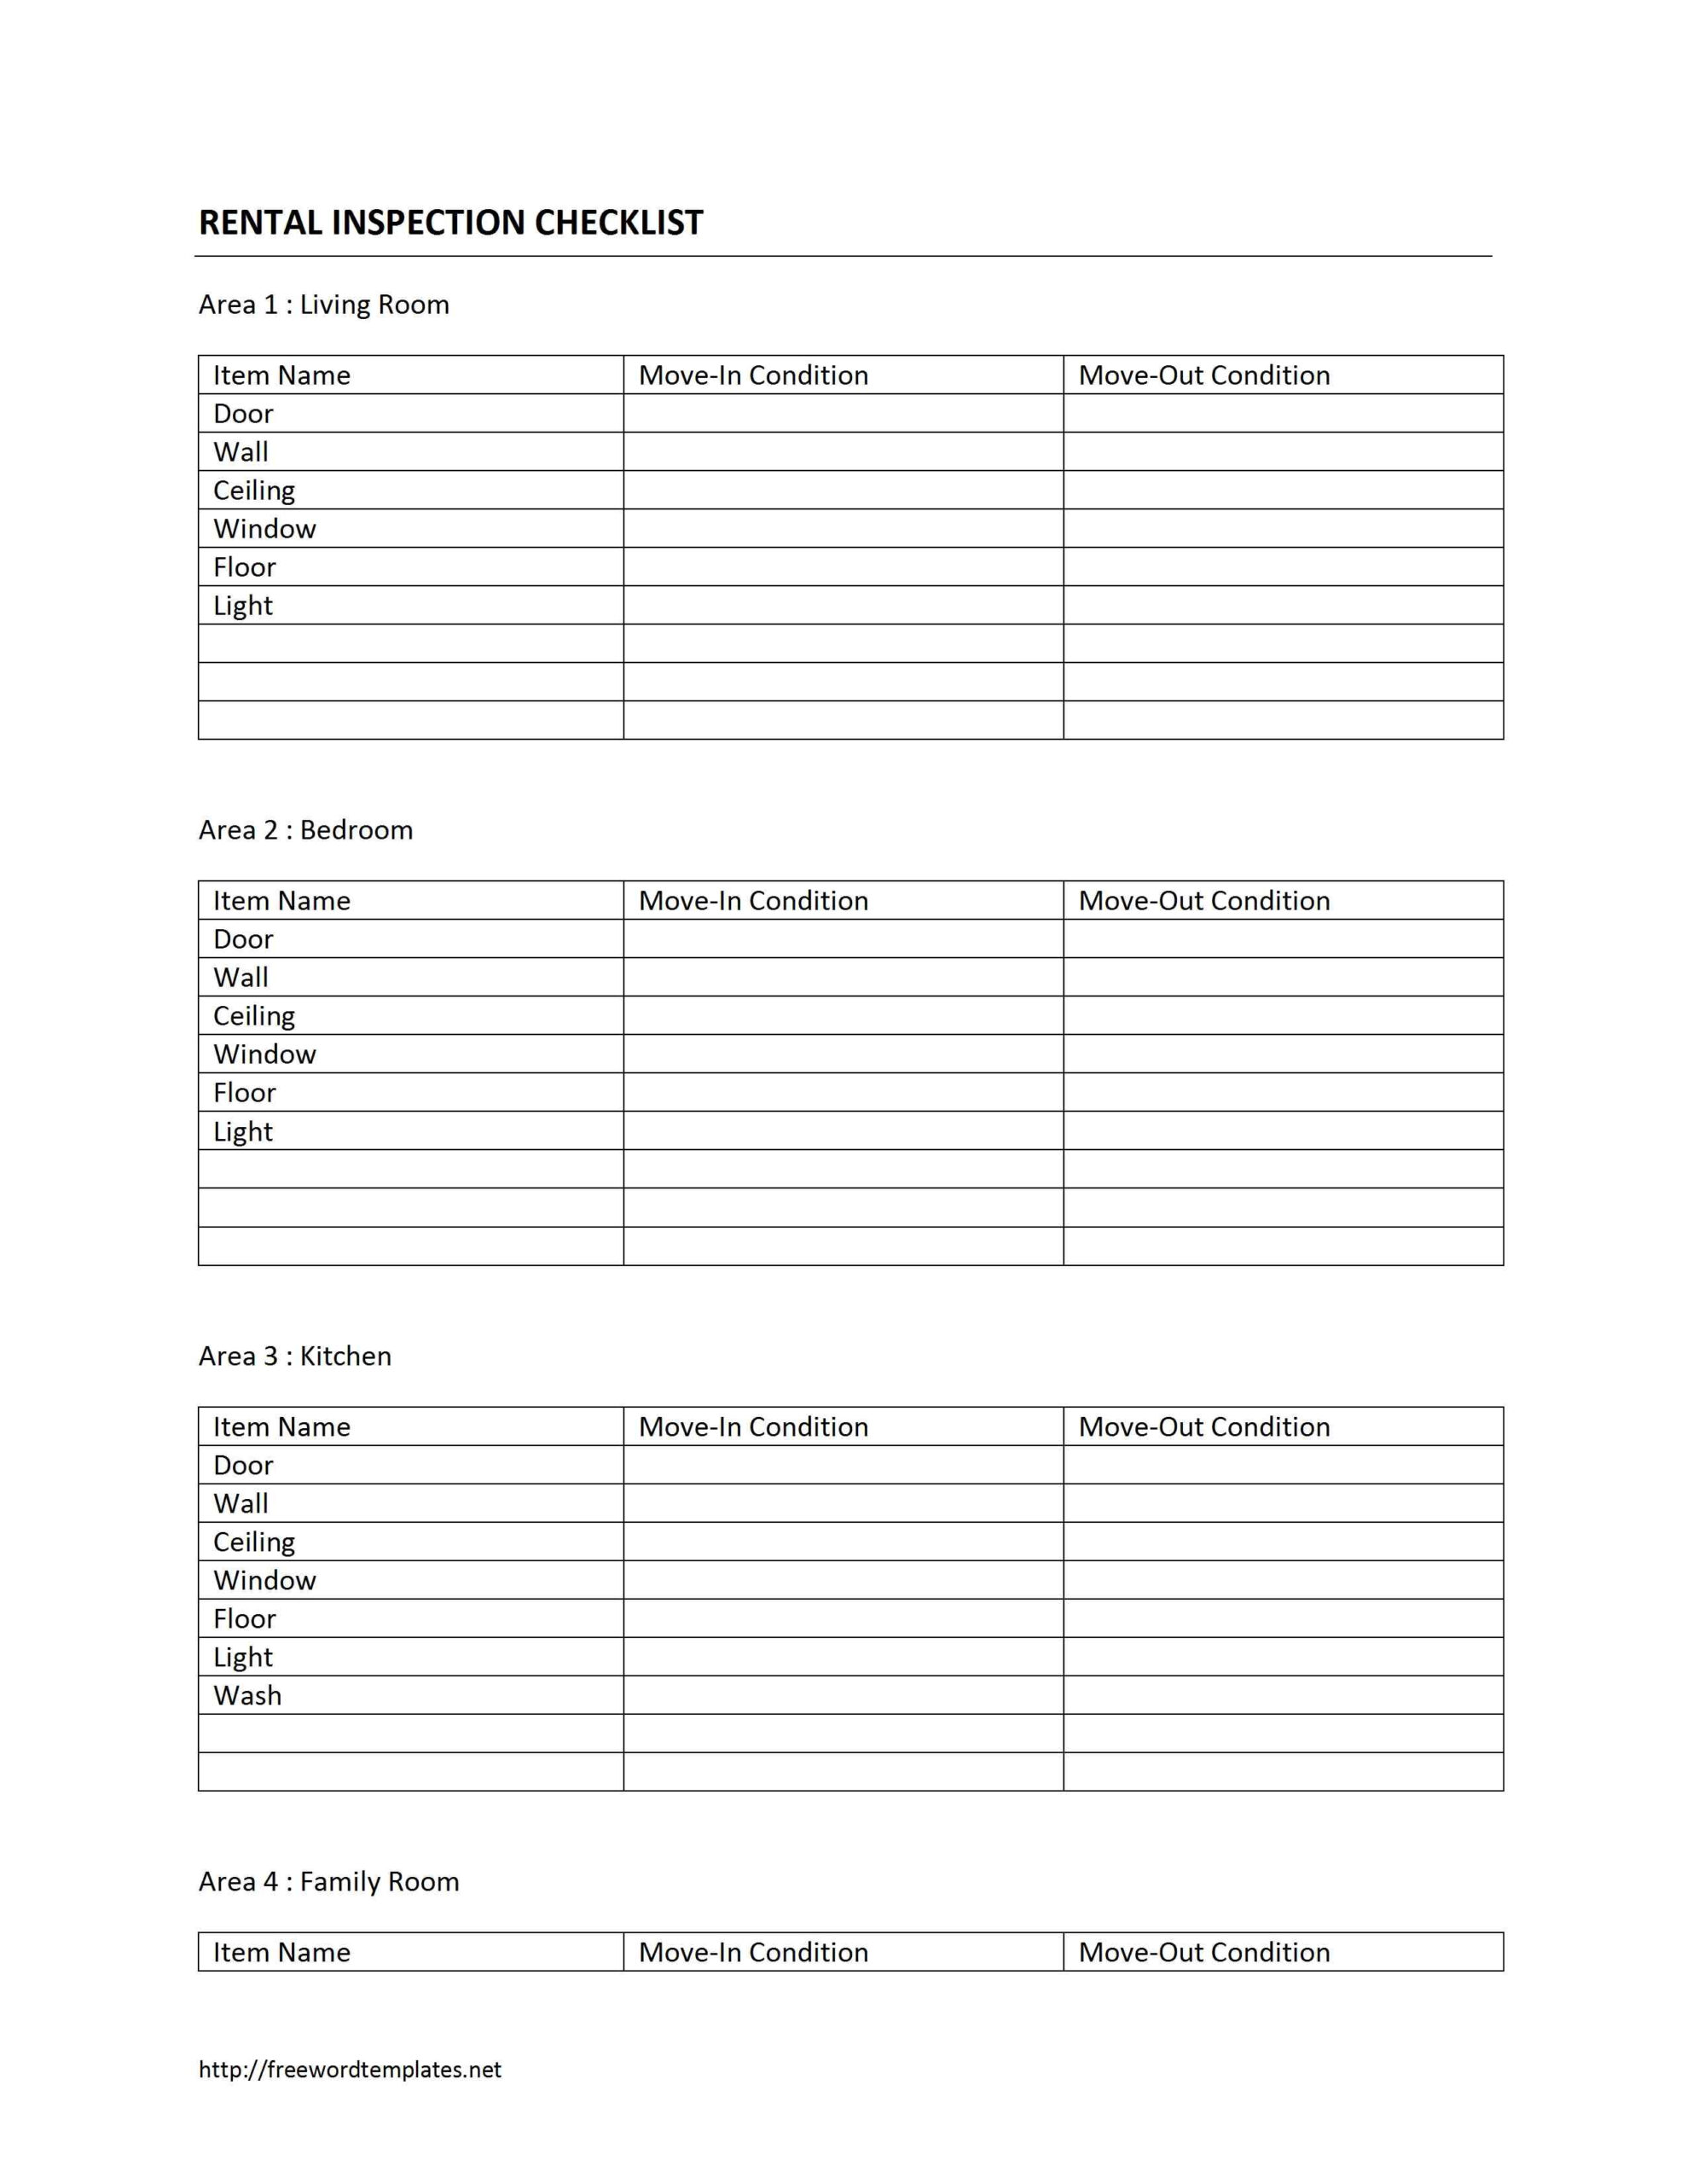 Home Rental Inspection Checklist Template Pertaining To Rental Inventory Checklist Template With Rental Inventory Checklist Template